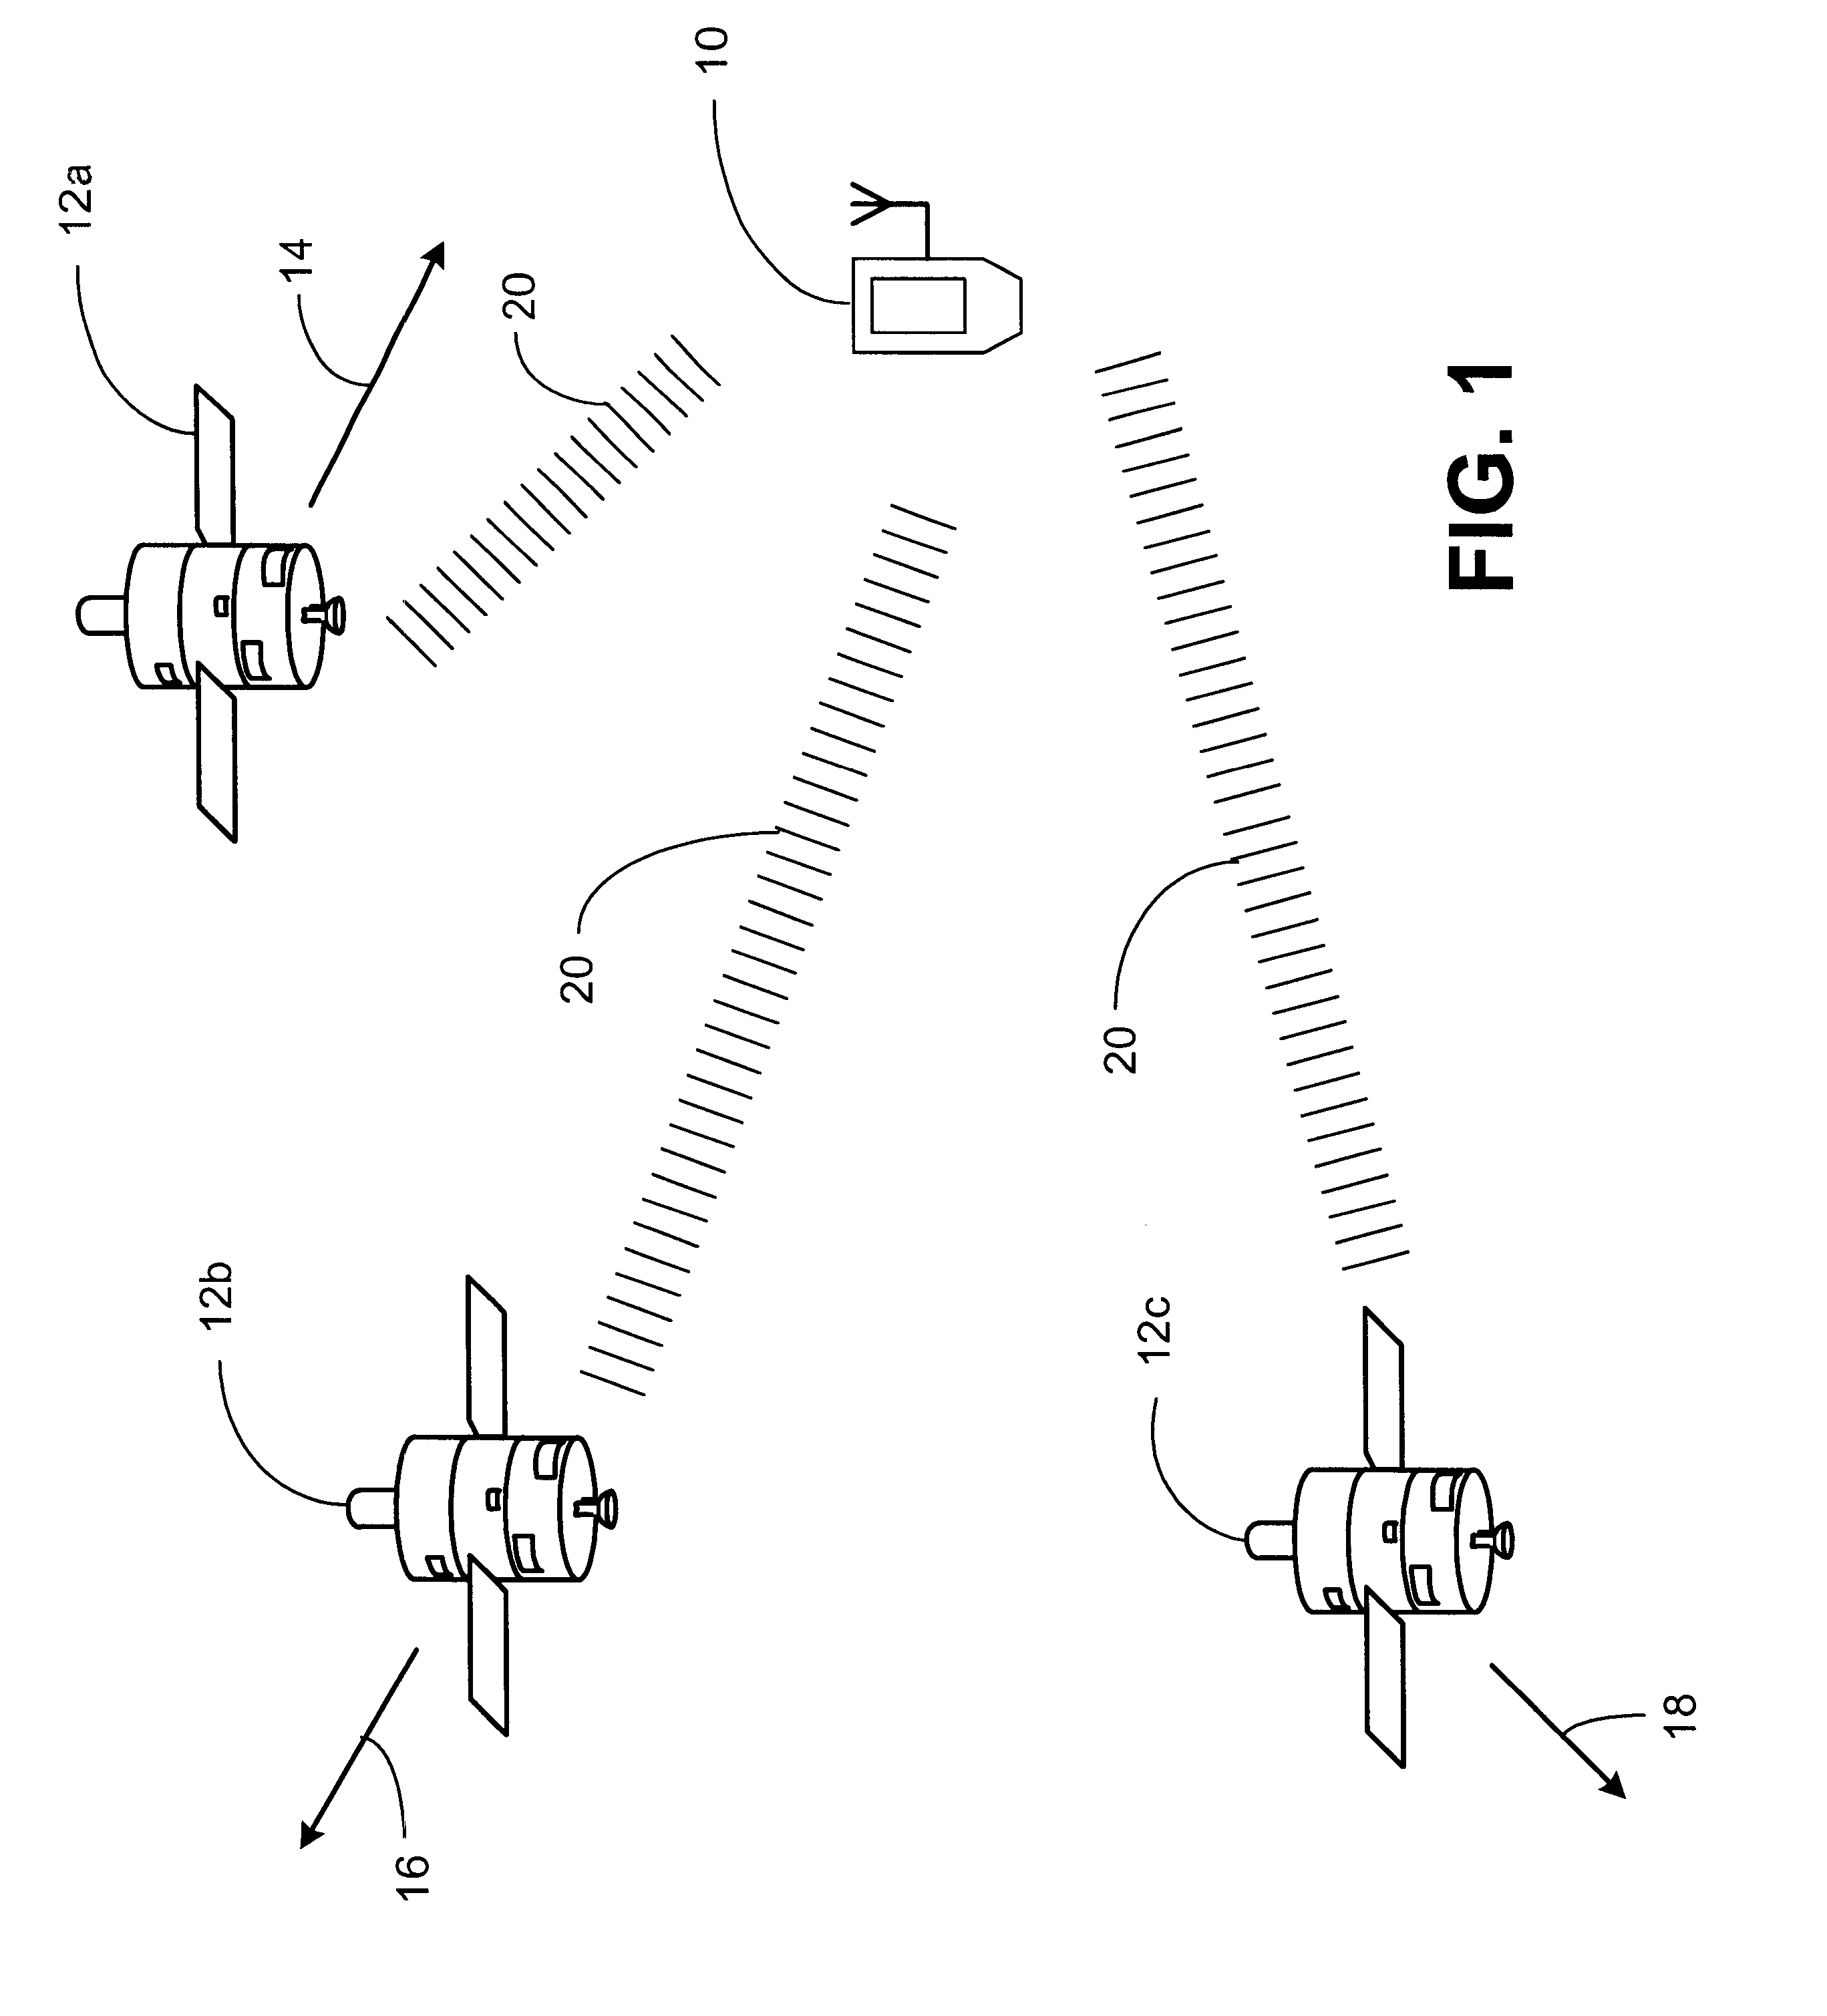 Signal detector employing coherent integration